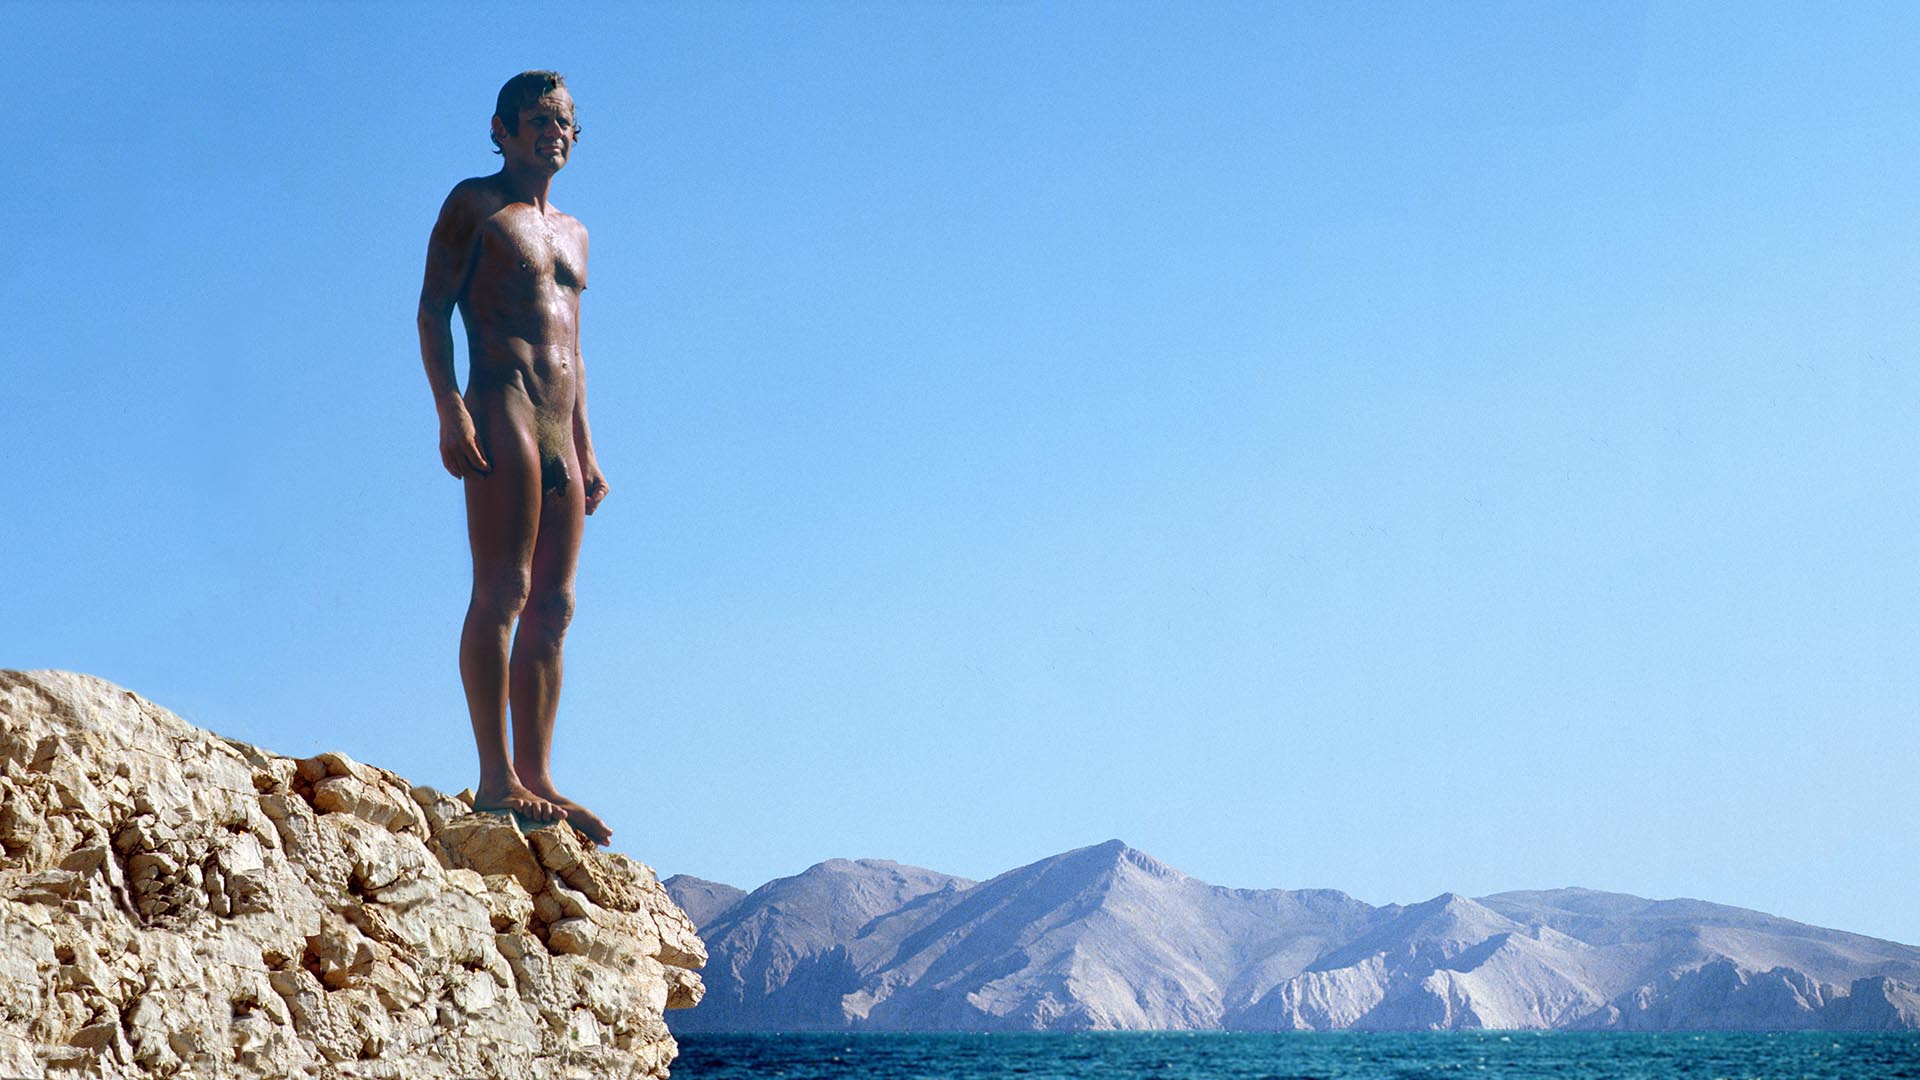 Naturism sports on holiday: naked and free